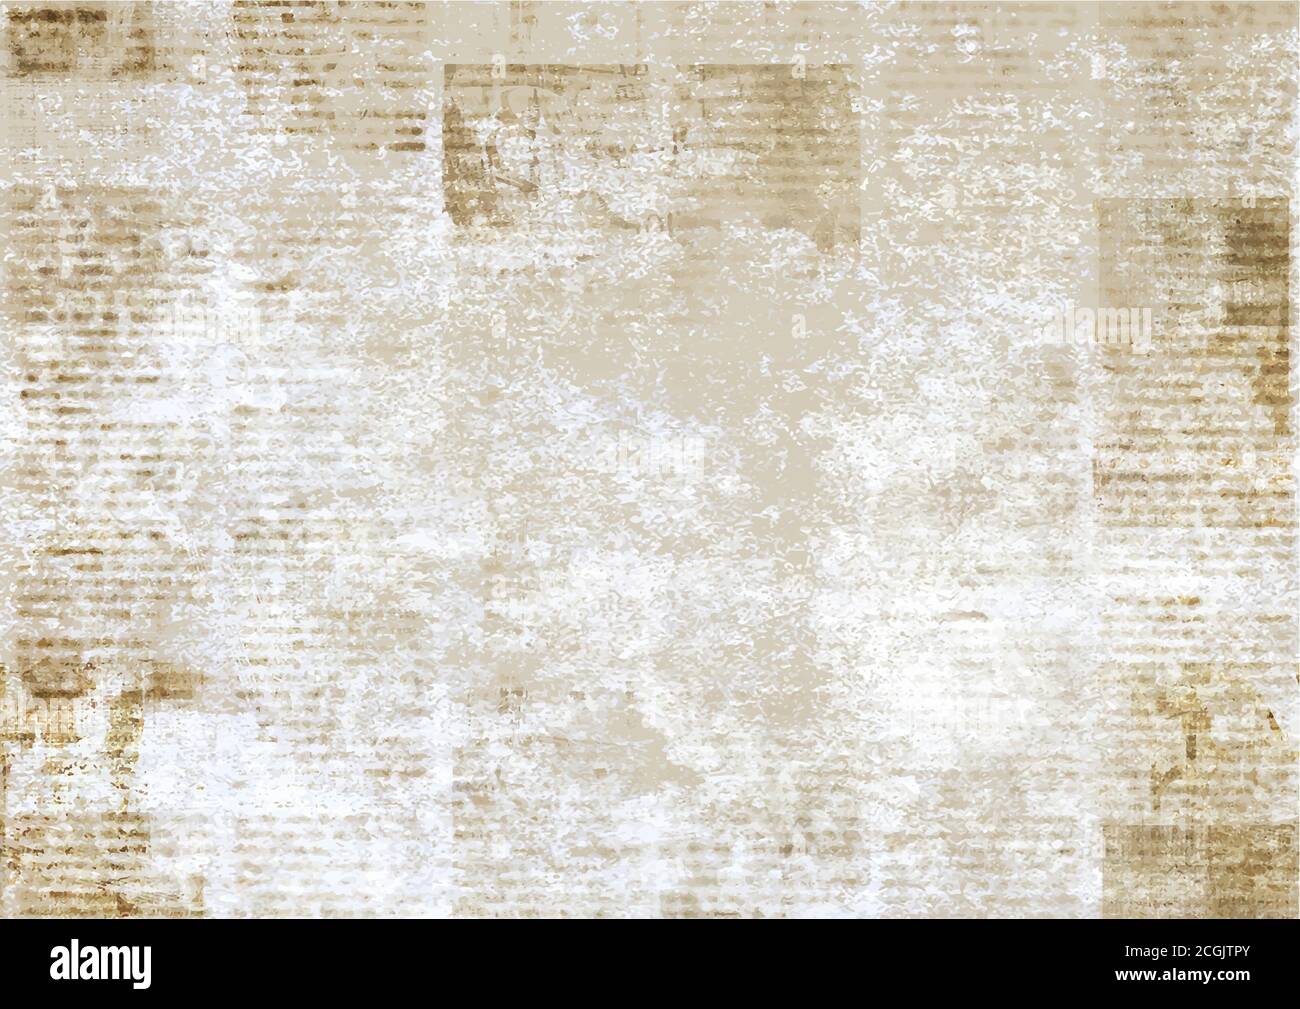 Newspaper page english text  Vintage paper textures, Paper texture, Paper  background texture